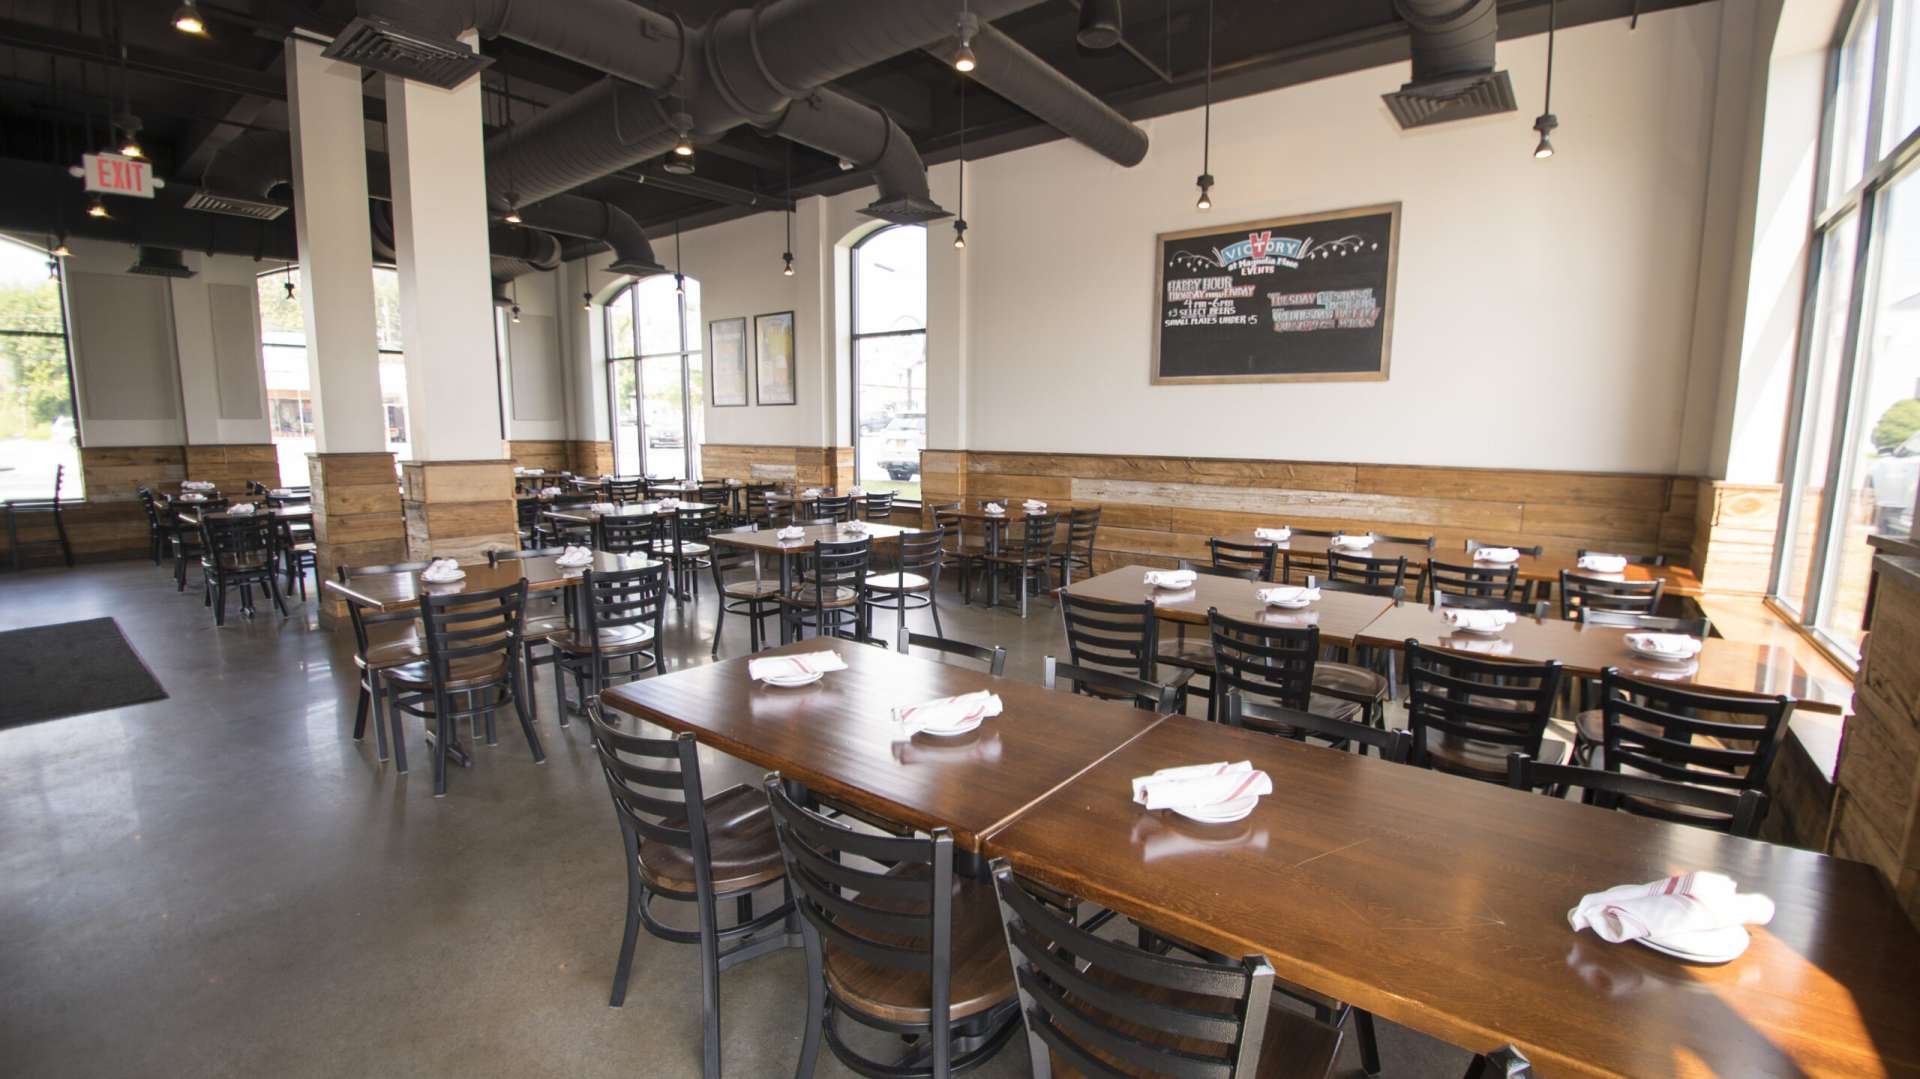 Interior of Victory Brewing Company with numerous dining tables and chairs.